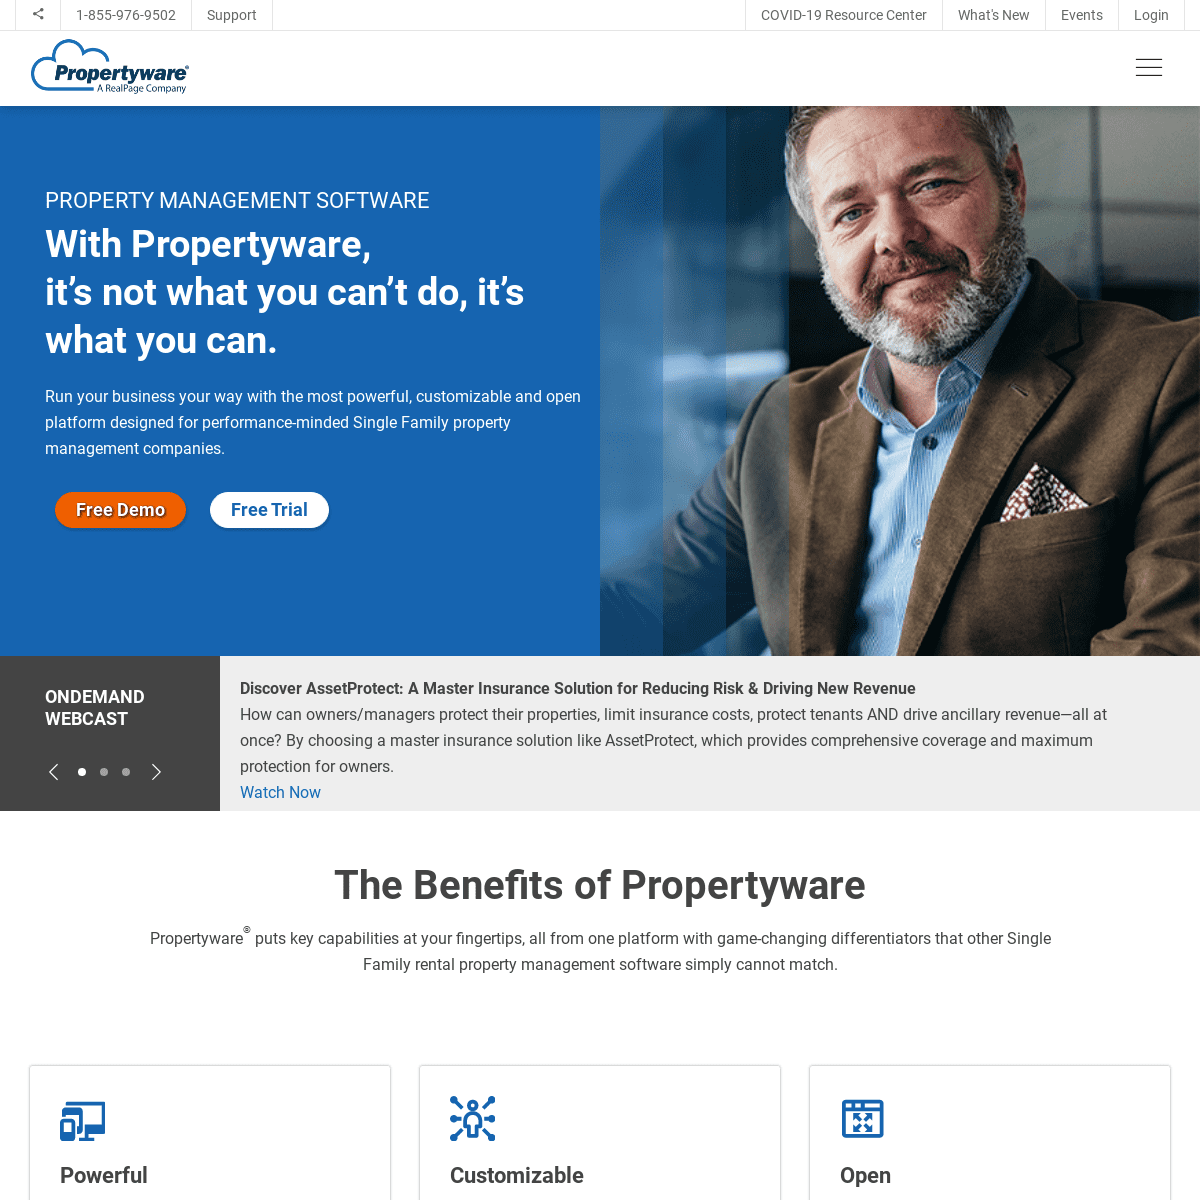 A complete backup of https://propertyware.com